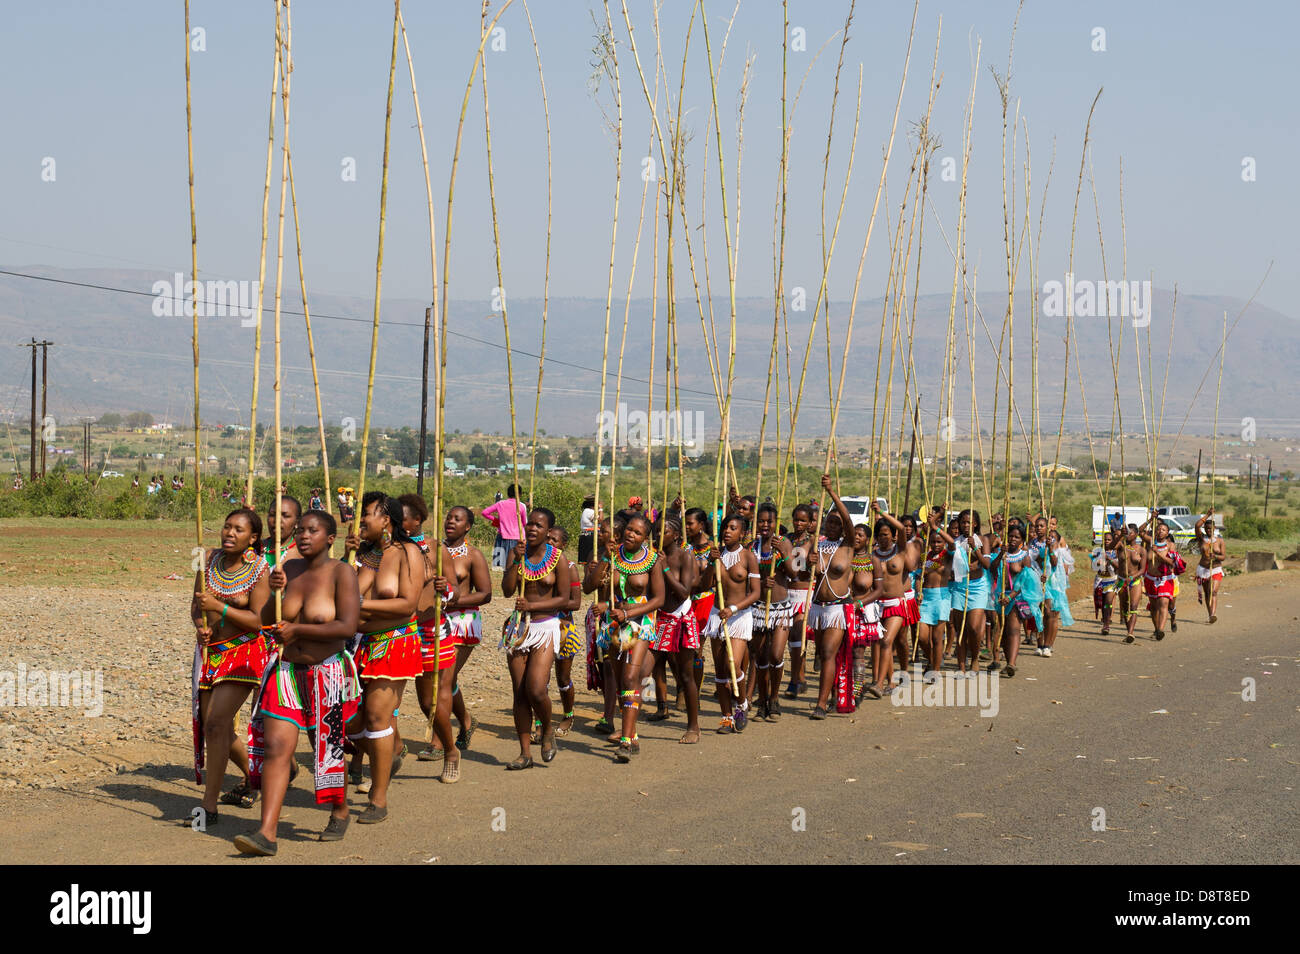 Zulu Maidens Deliver Reed Sticks To The King Zulu Reed